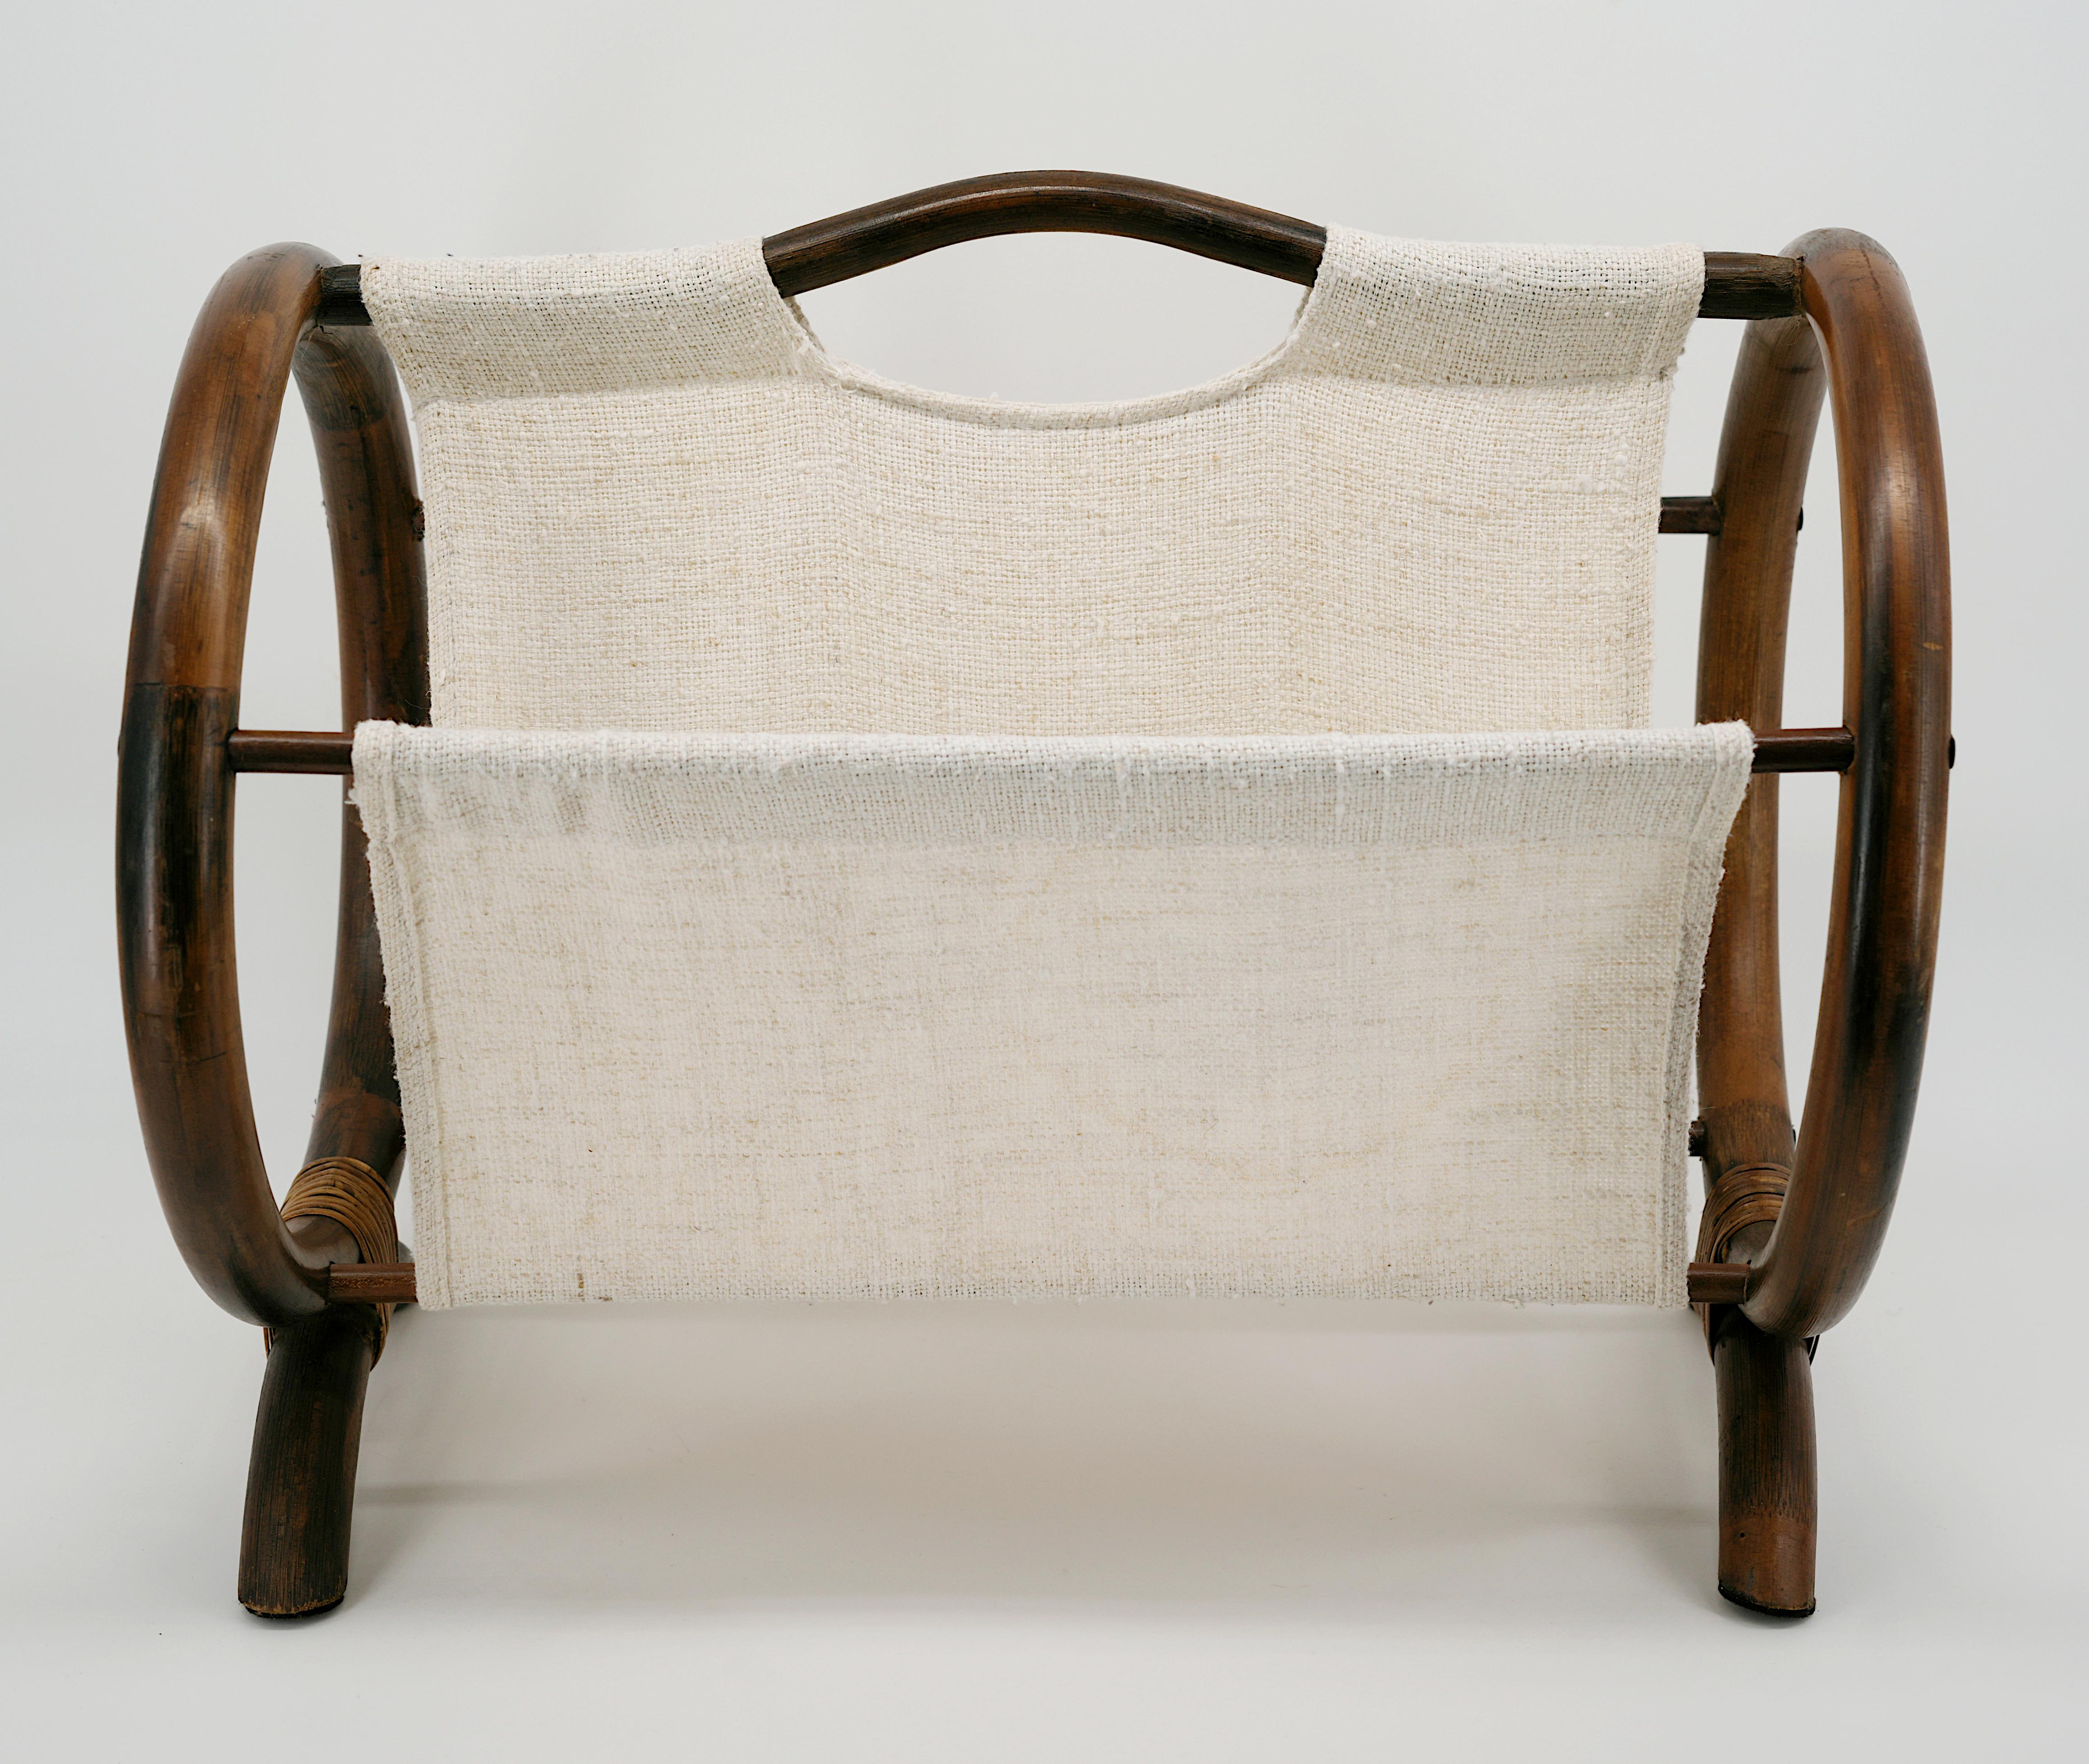 French mid-century bamboo and rattan magazine rack, France, 1960s. Bamboo, Rattan & Fabric. Height : 14.8